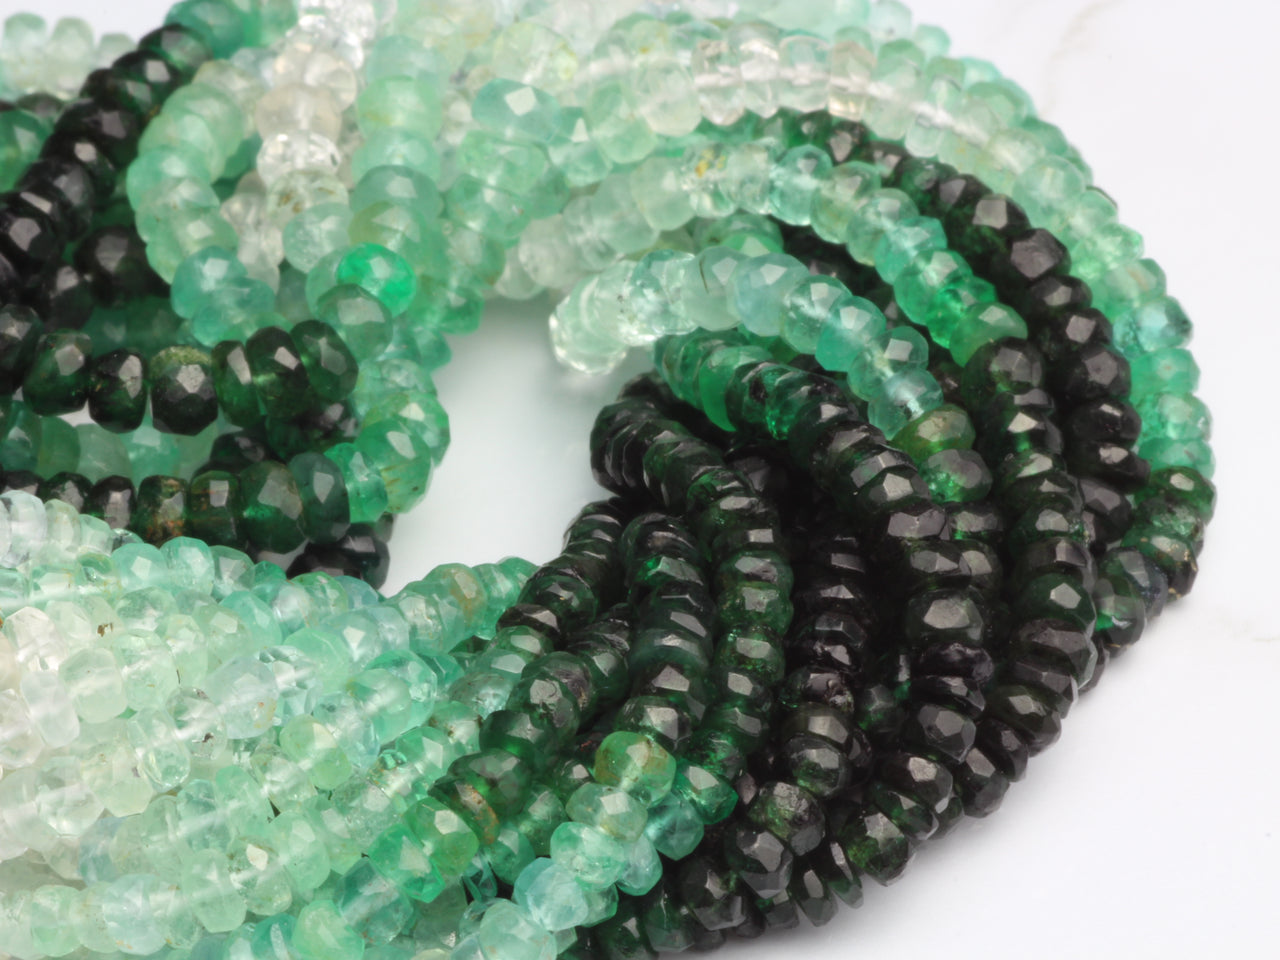 Ombre Green and White Emerald 3mm Faceted Rondelles